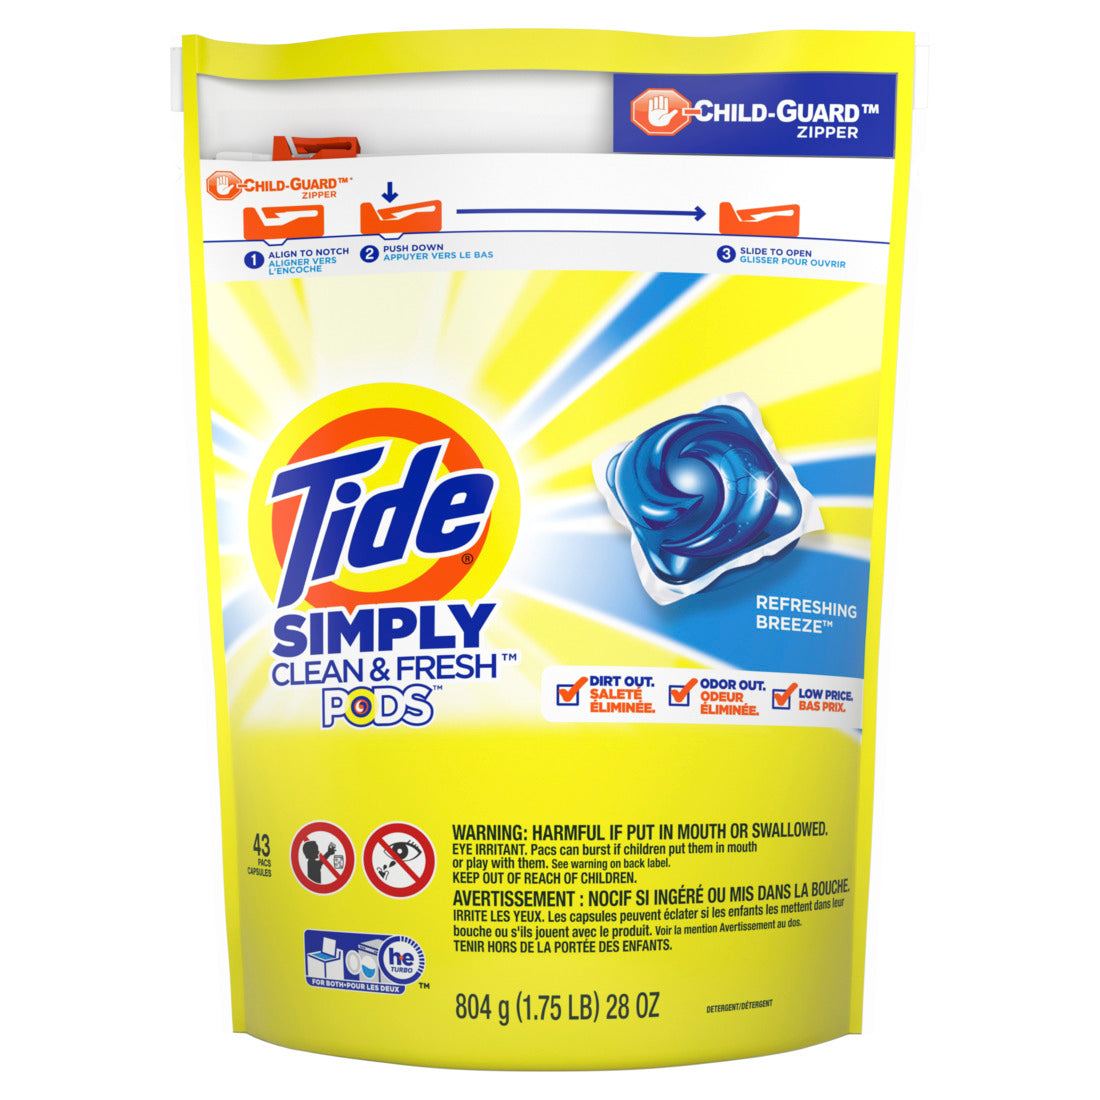 Tide PODS Simply Clean & Fresh Laundry Pacs Refreshing Breeze - 43ct/4pk